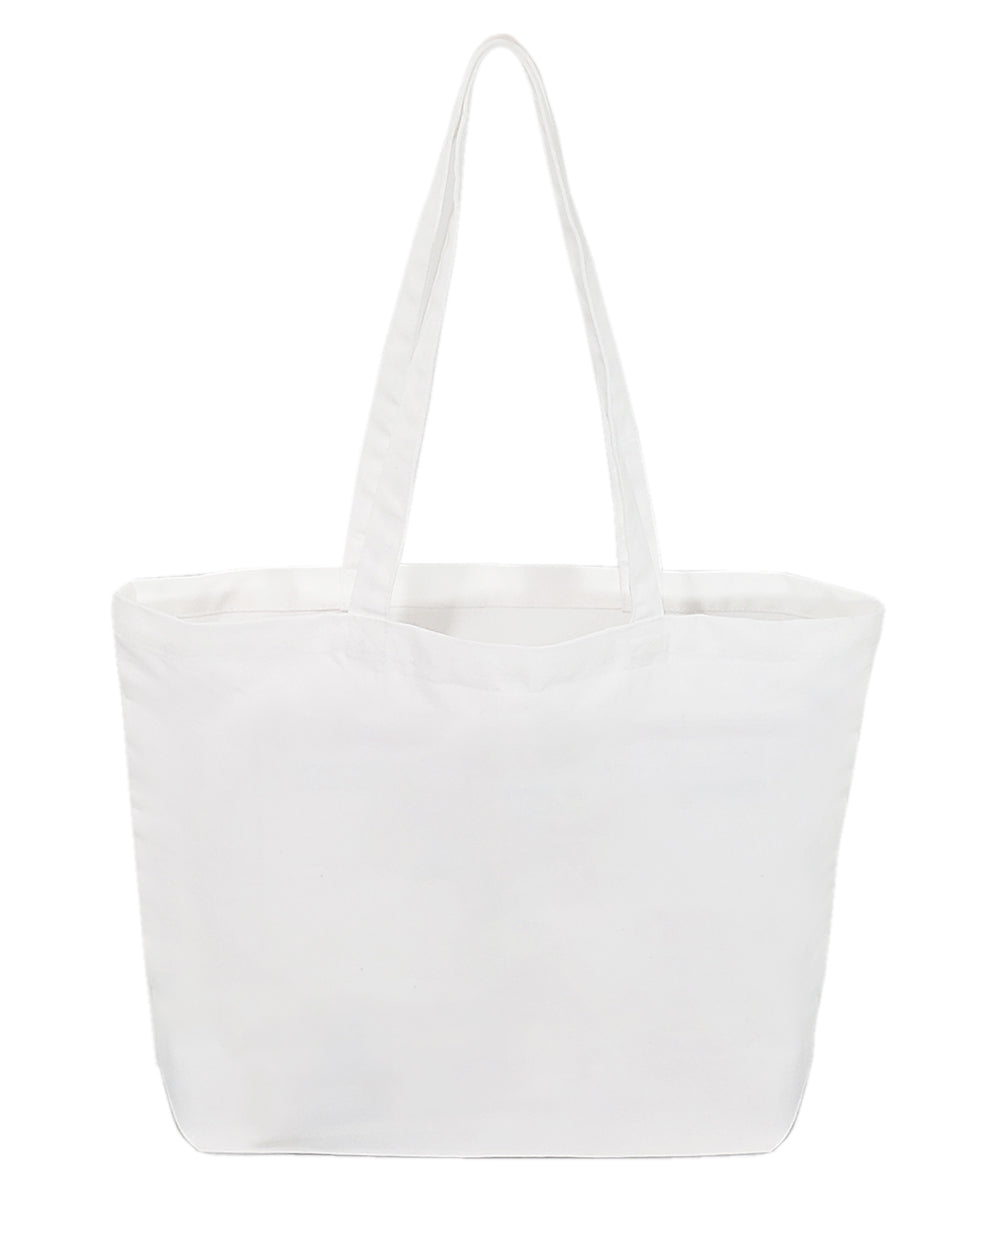 12 ct Large 100% Polyester Canvas Sublimation Tote Bags White - By Dozen